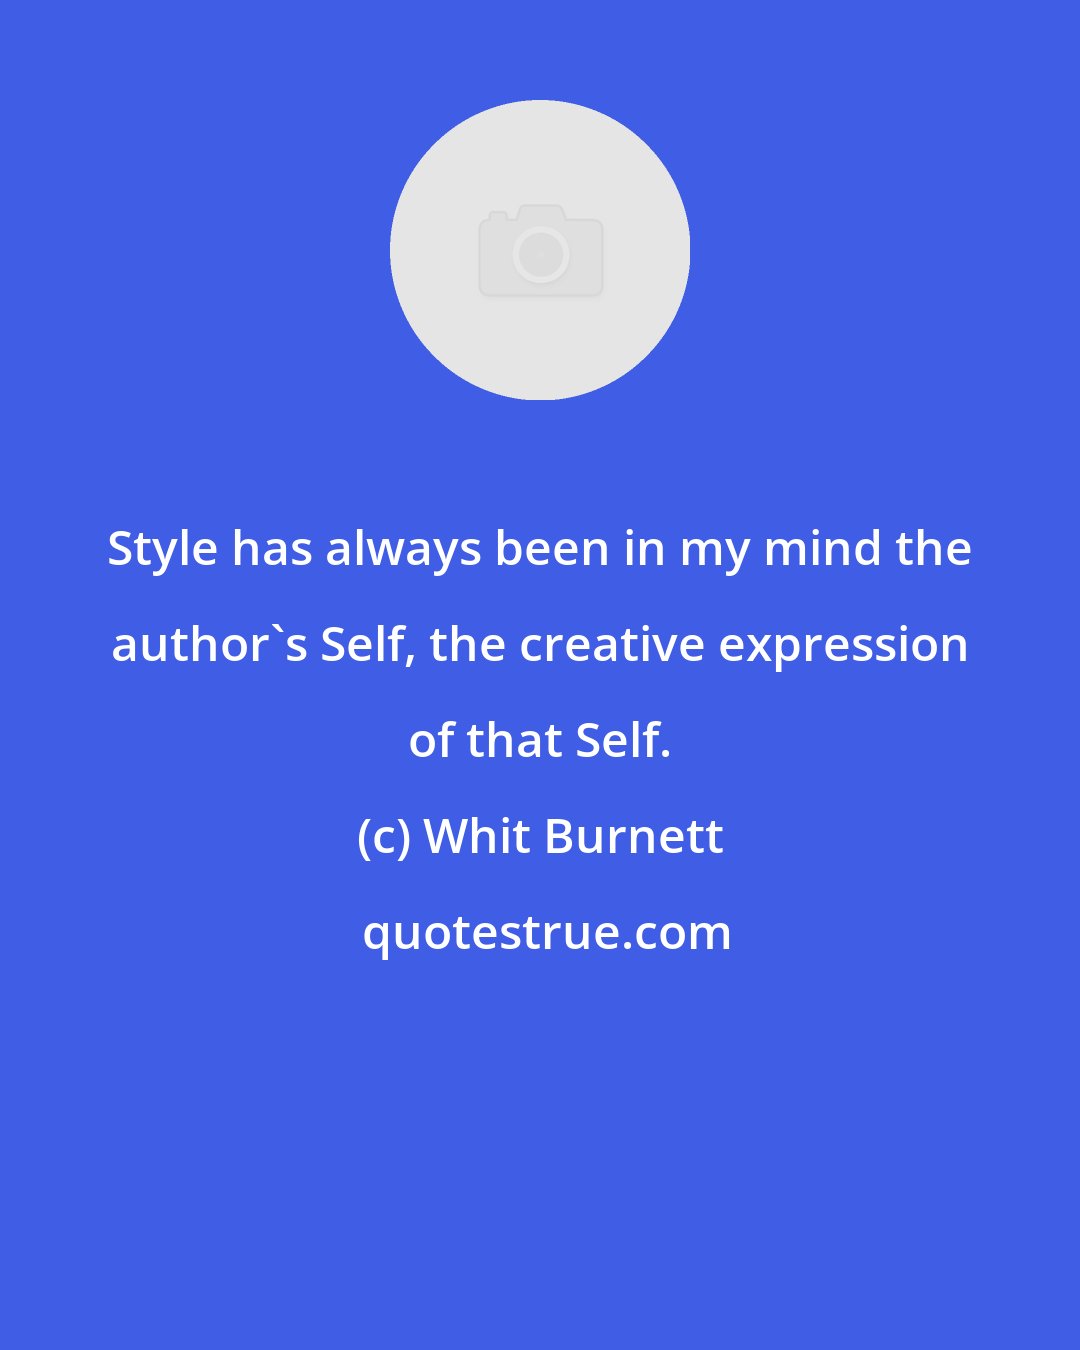 Whit Burnett: Style has always been in my mind the author's Self, the creative expression of that Self.